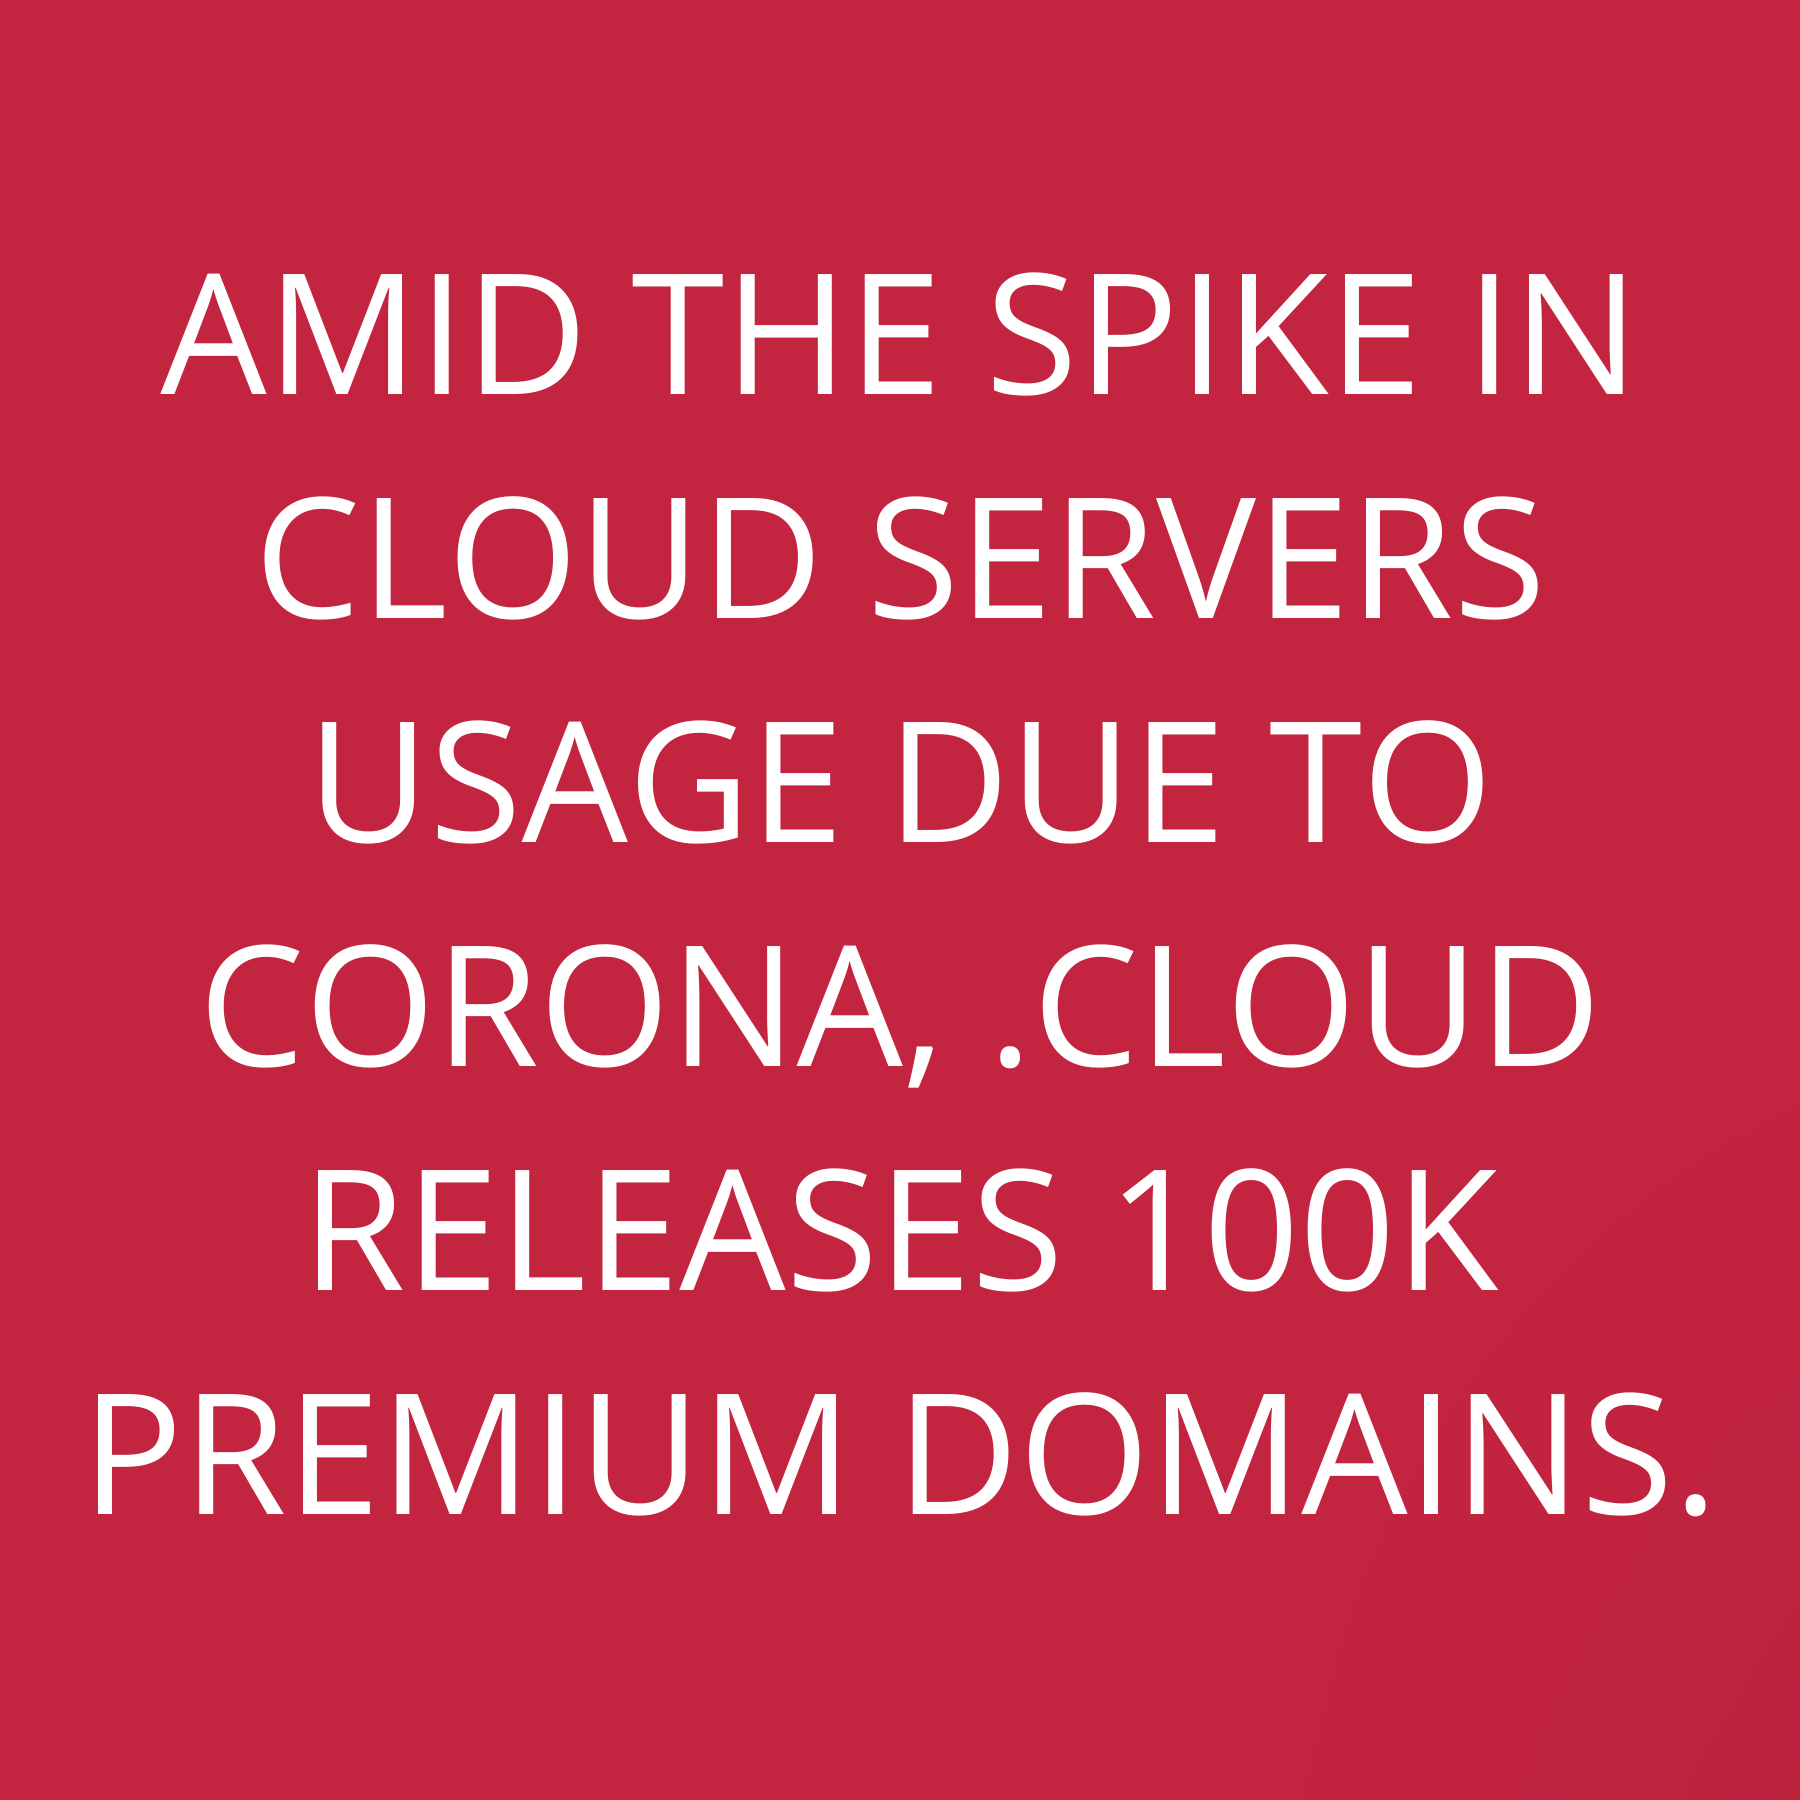 Amid the spike in Cloud servers usage due to Corona, .Cloud releases 100K premium domains.